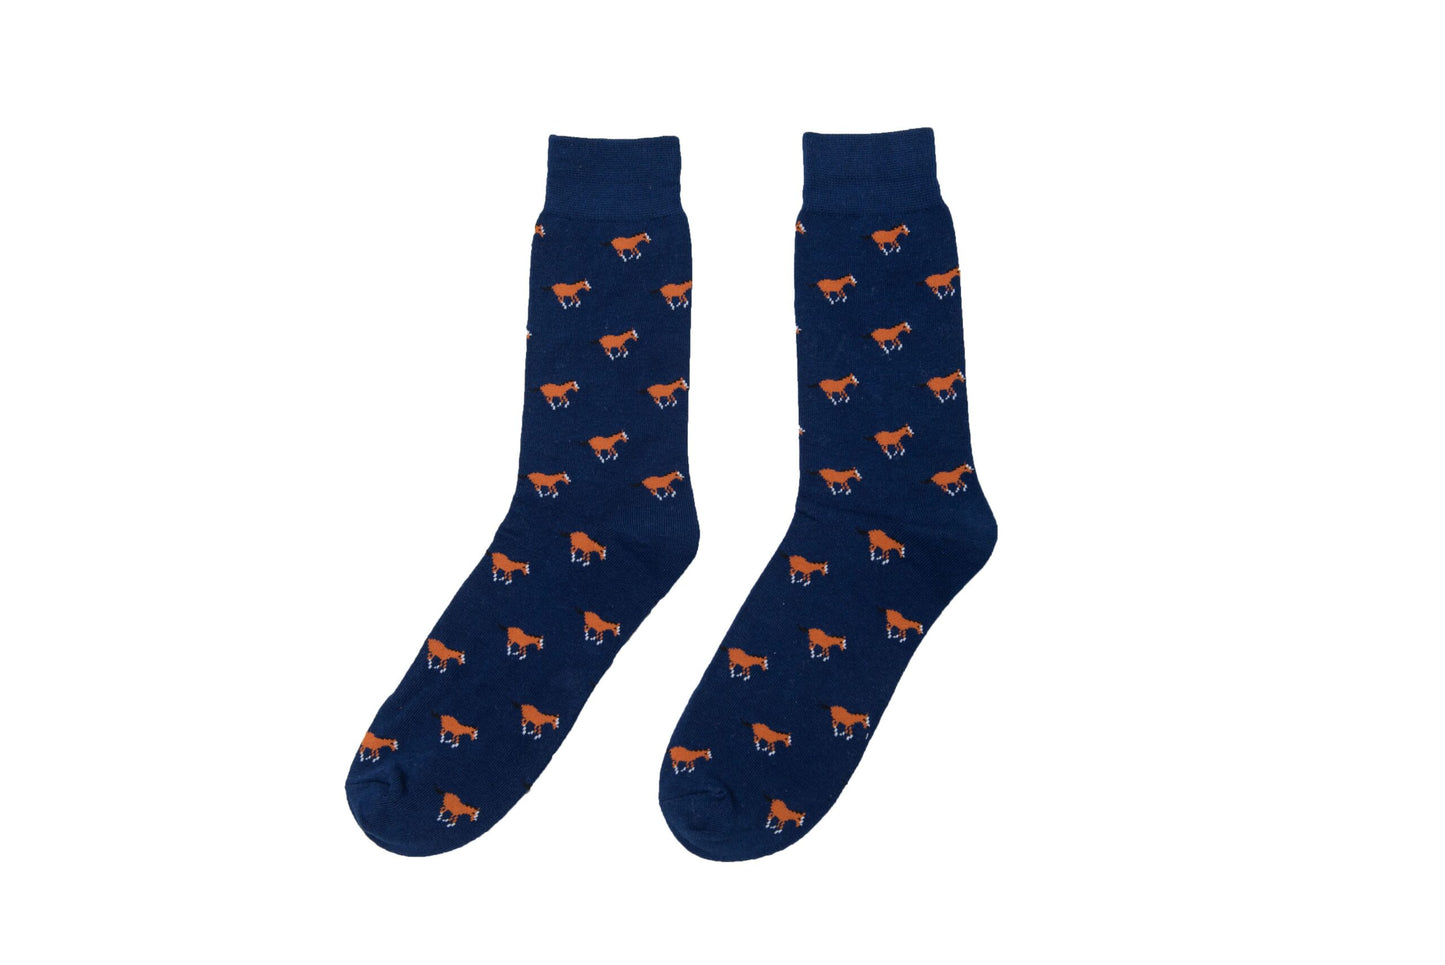 A pair of Horse socks with orange foxes on them.